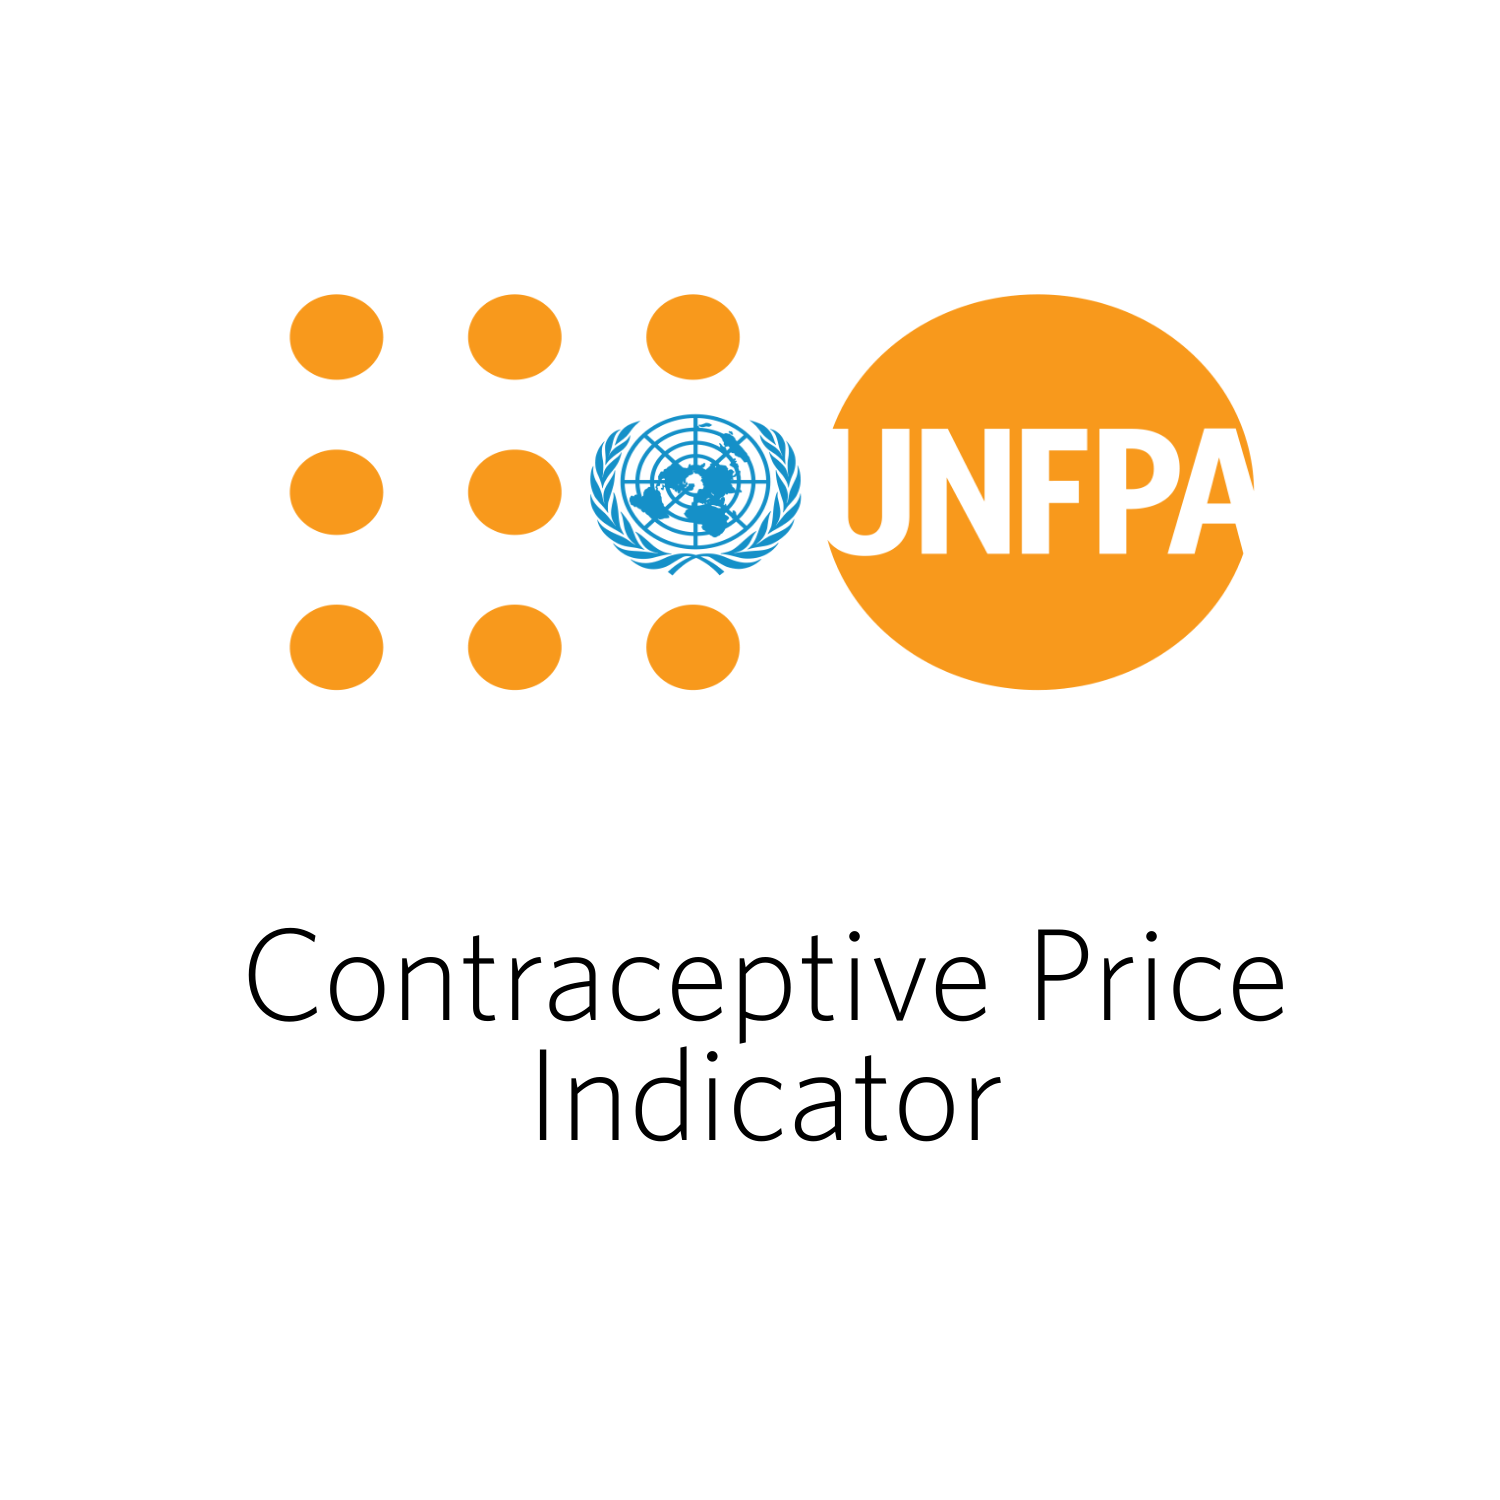 Contraceptive Price Indicator for the year 2017